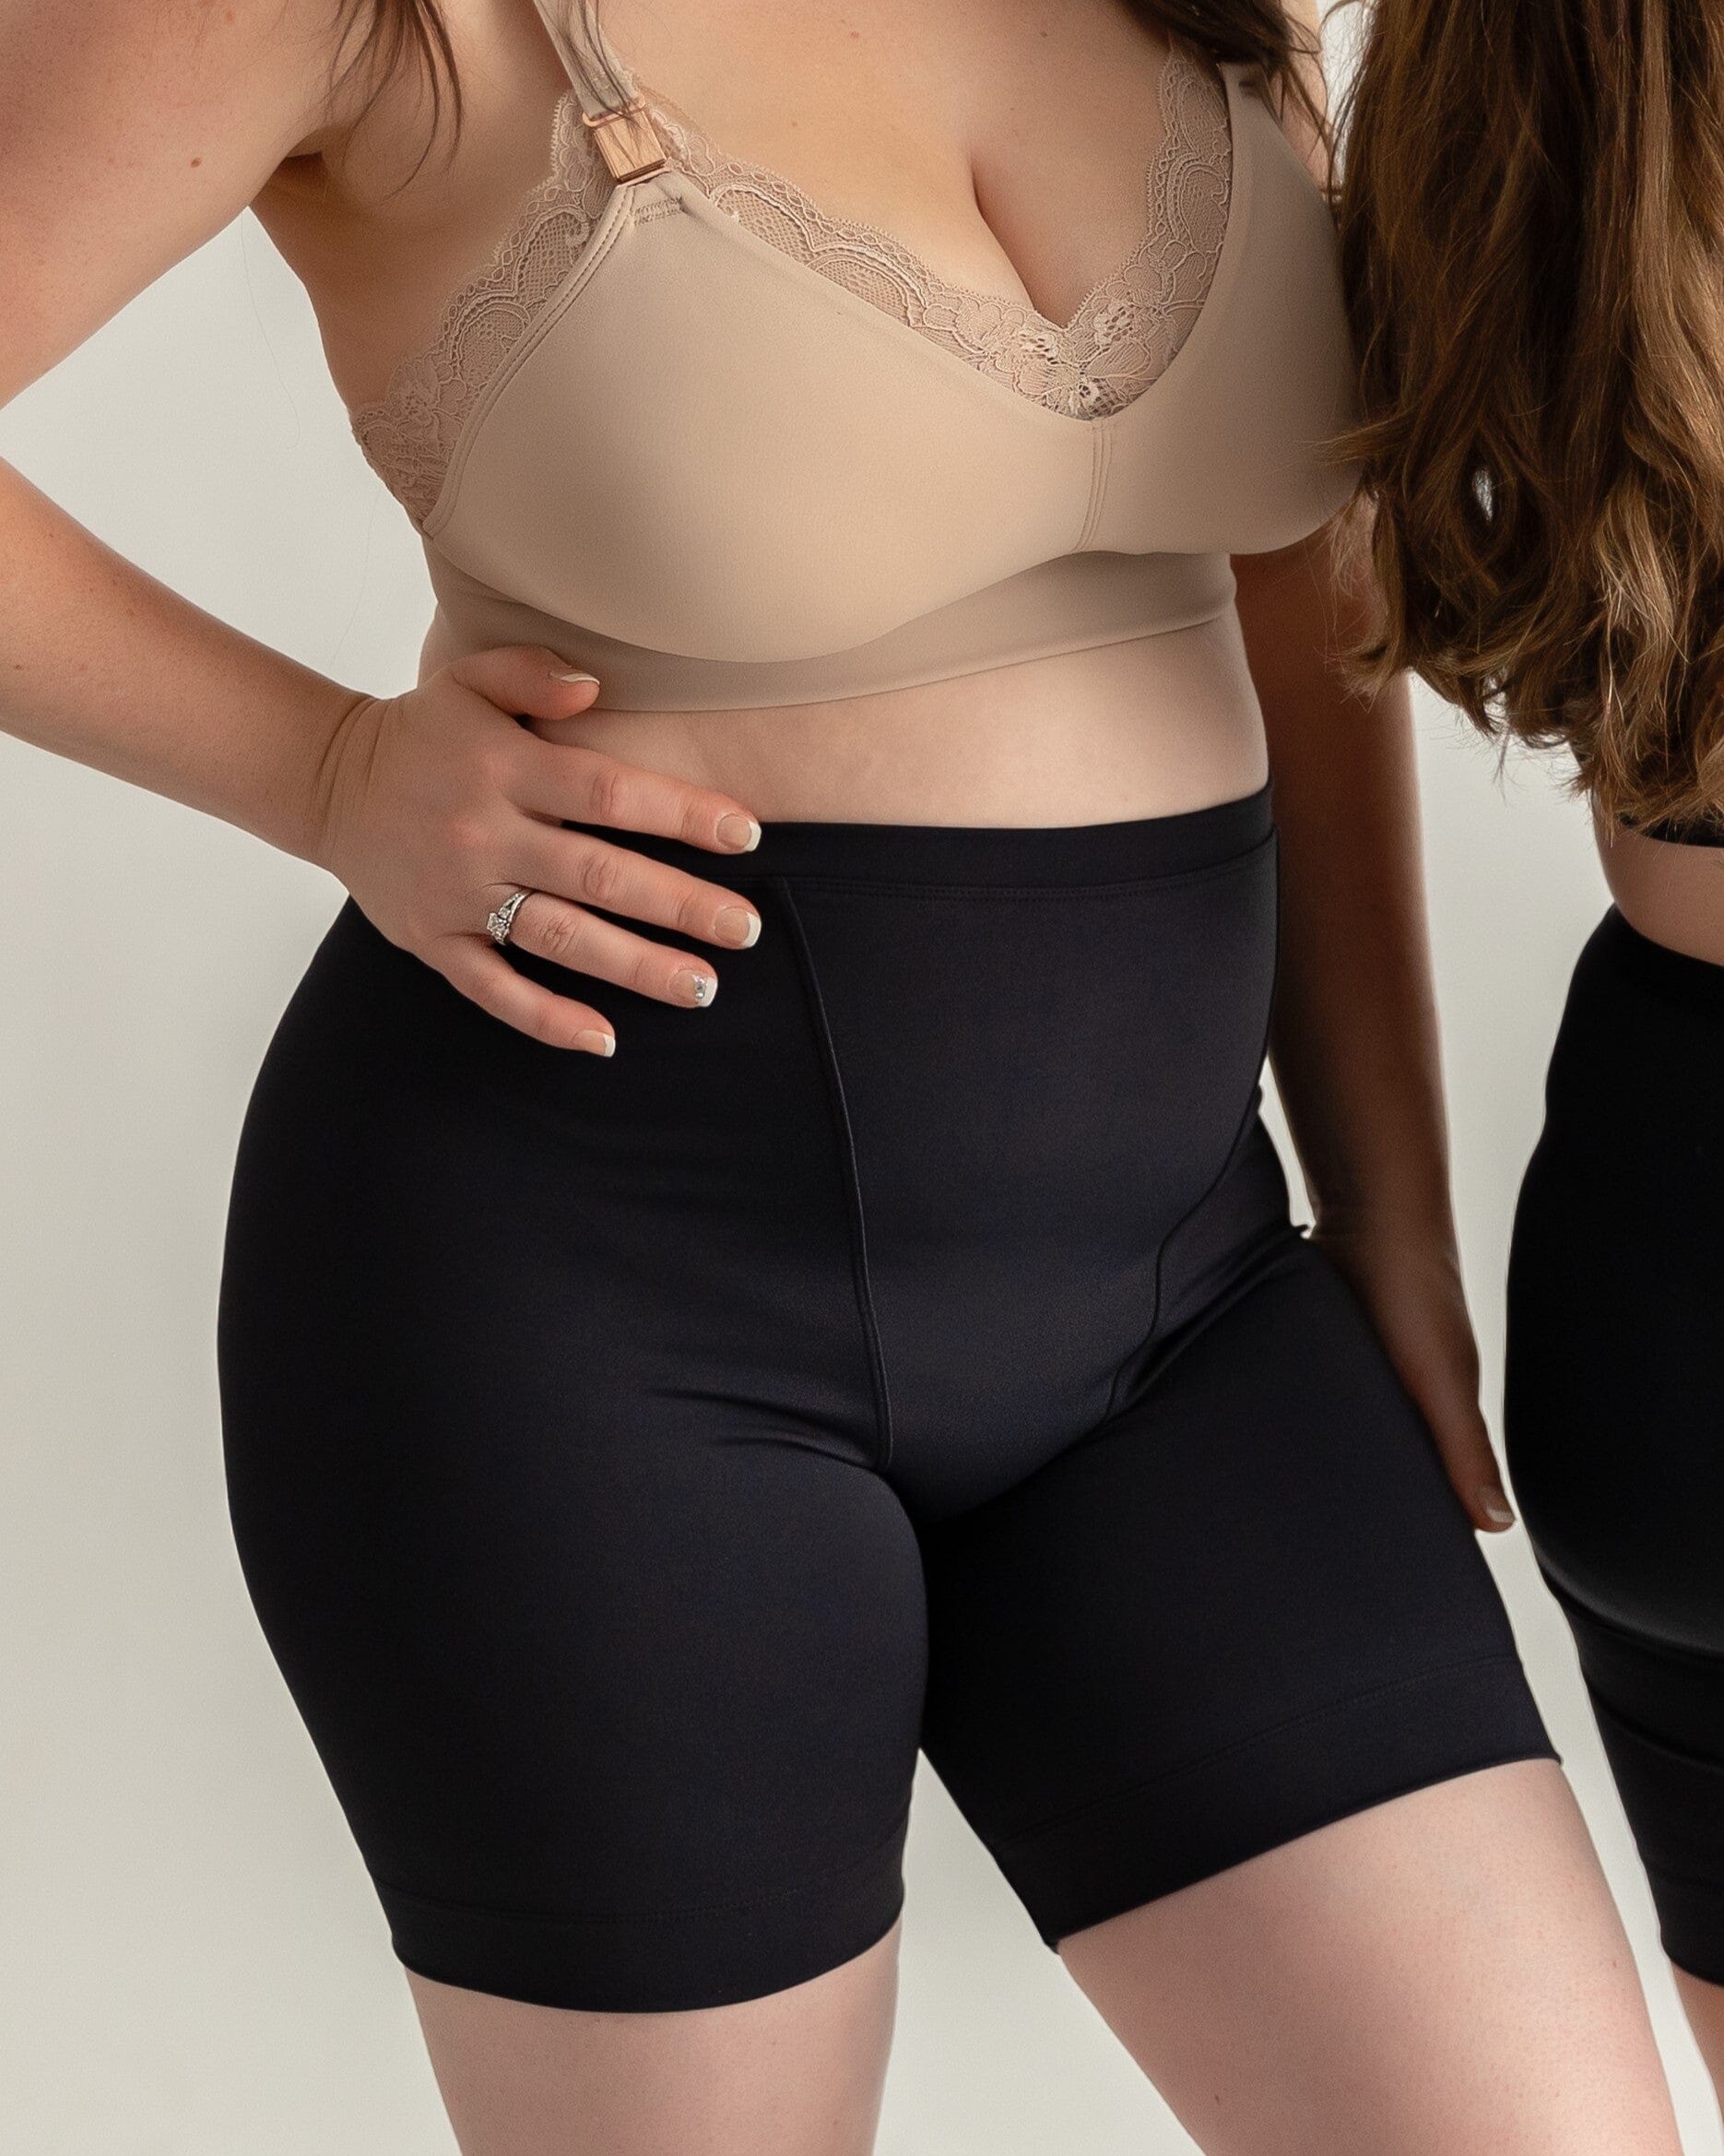 Post Partum Body Shaper with Bra, Brief Length